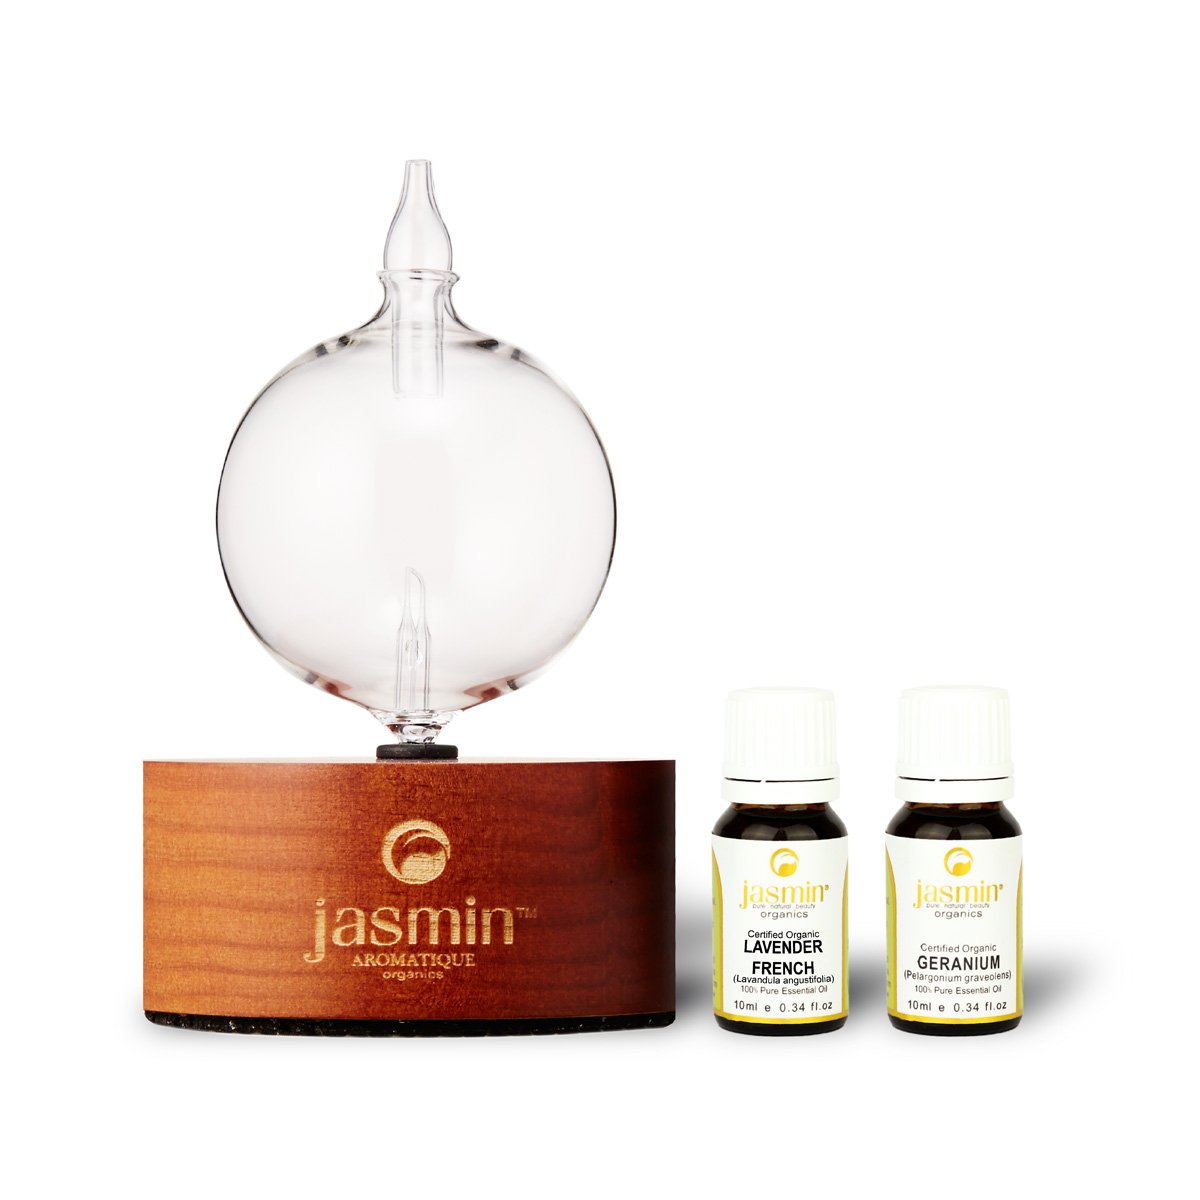 It’s all in one place with Jasmin Organic’s gift sets.